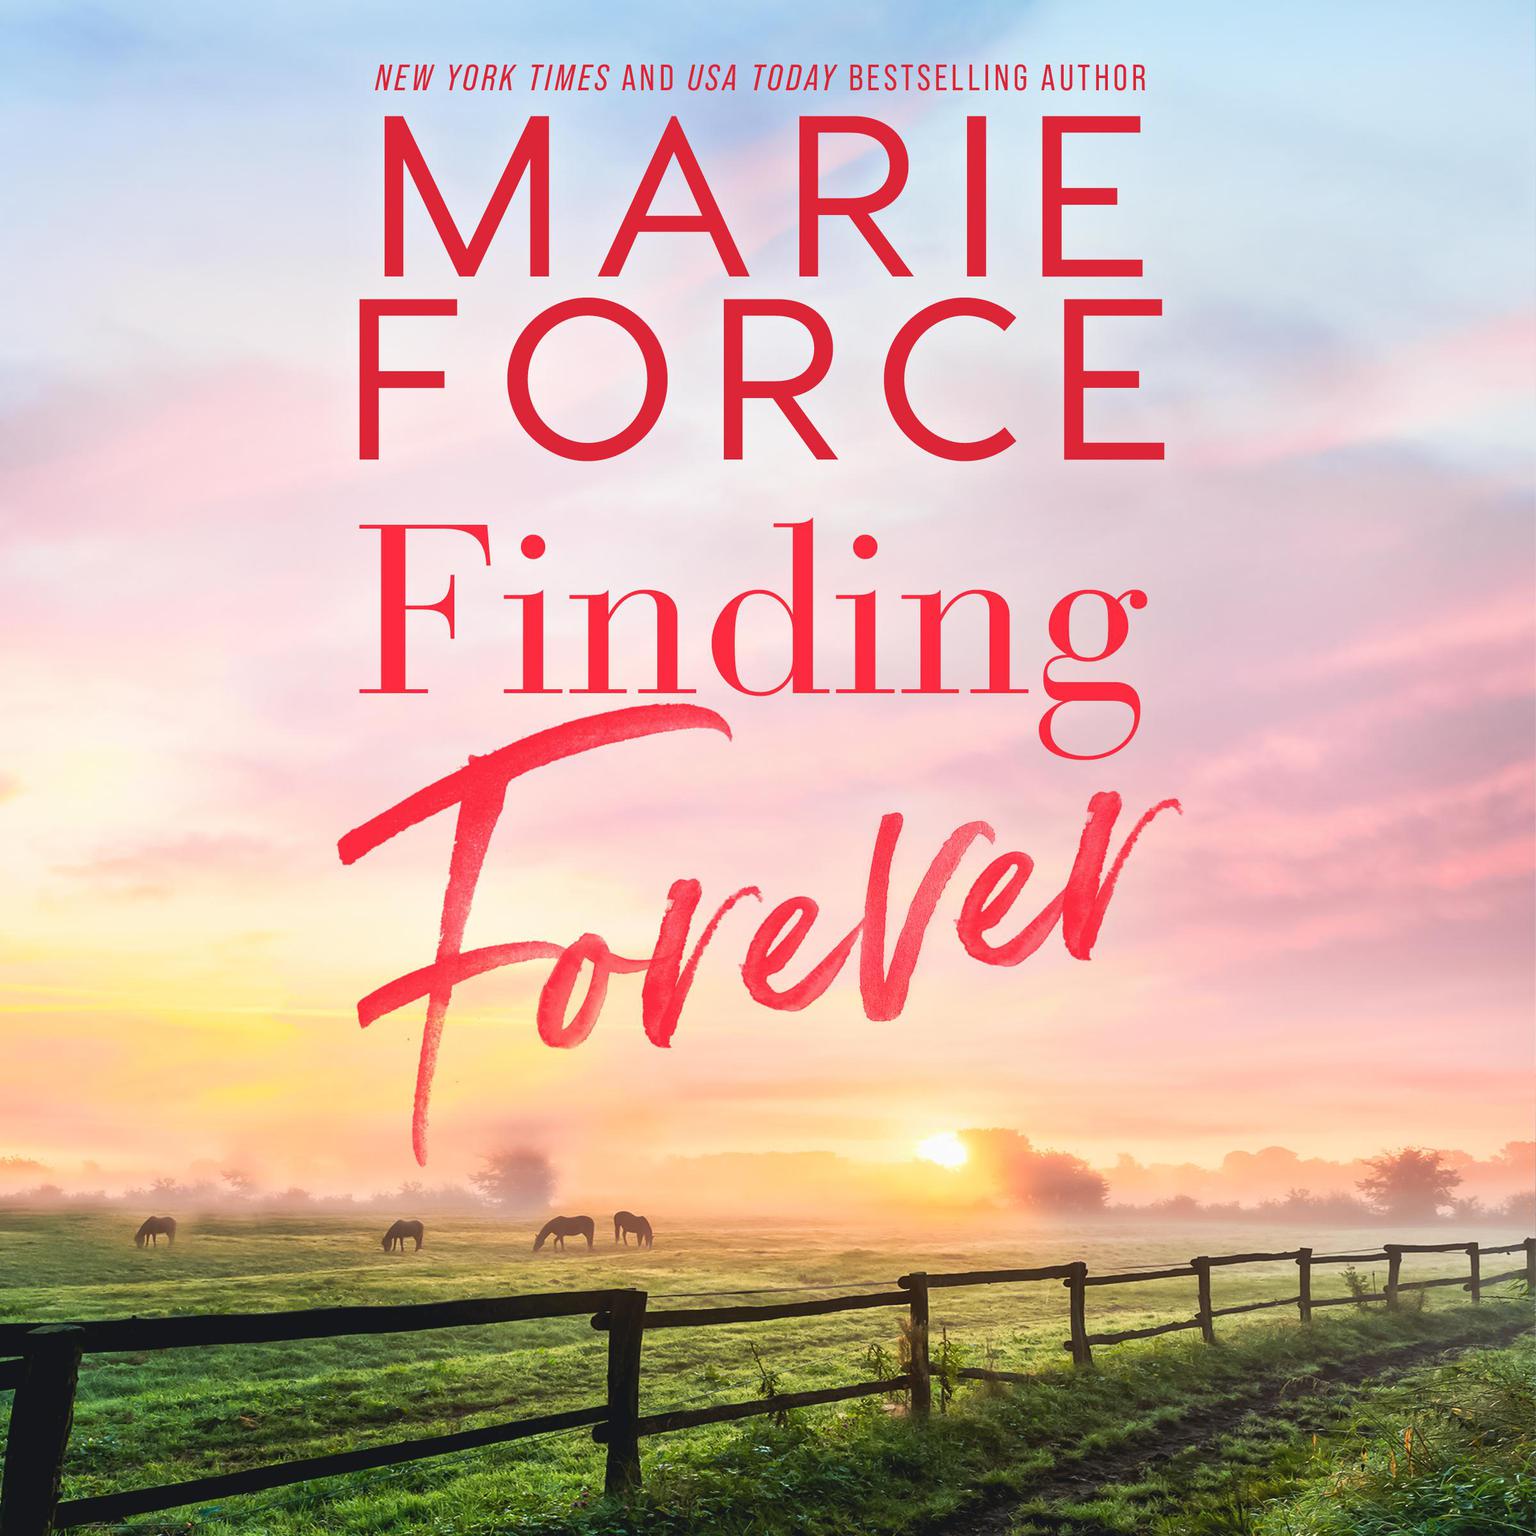 Finding Forever Audiobook, by Marie Force